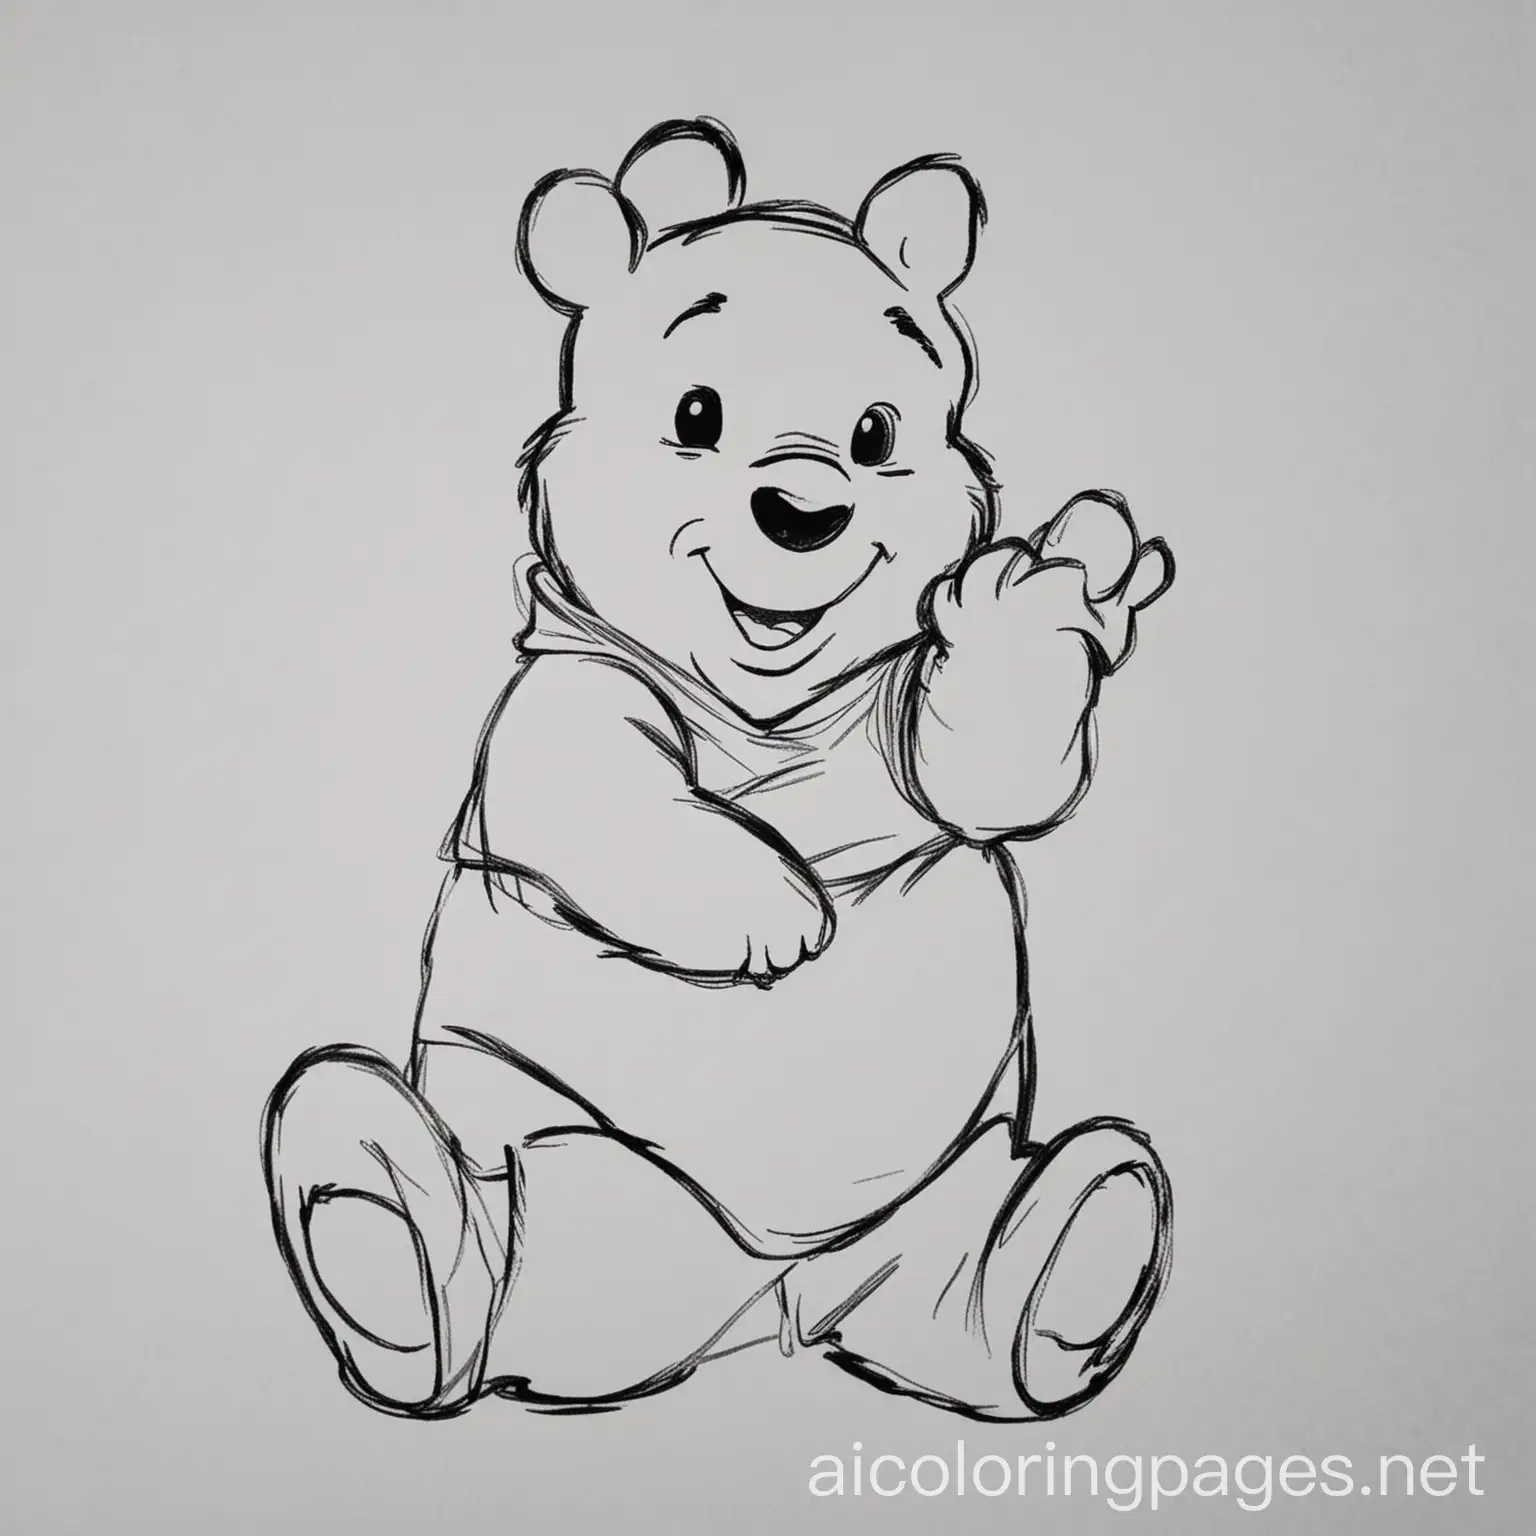 disney winnie the pooh
, Coloring Page, black and white, line art, white background, Simplicity, Ample White Space. The background of the coloring page is plain white to make it easy for young children to color within the lines. The outlines of all the subjects are easy to distinguish, making it simple for kids to color without too much difficulty